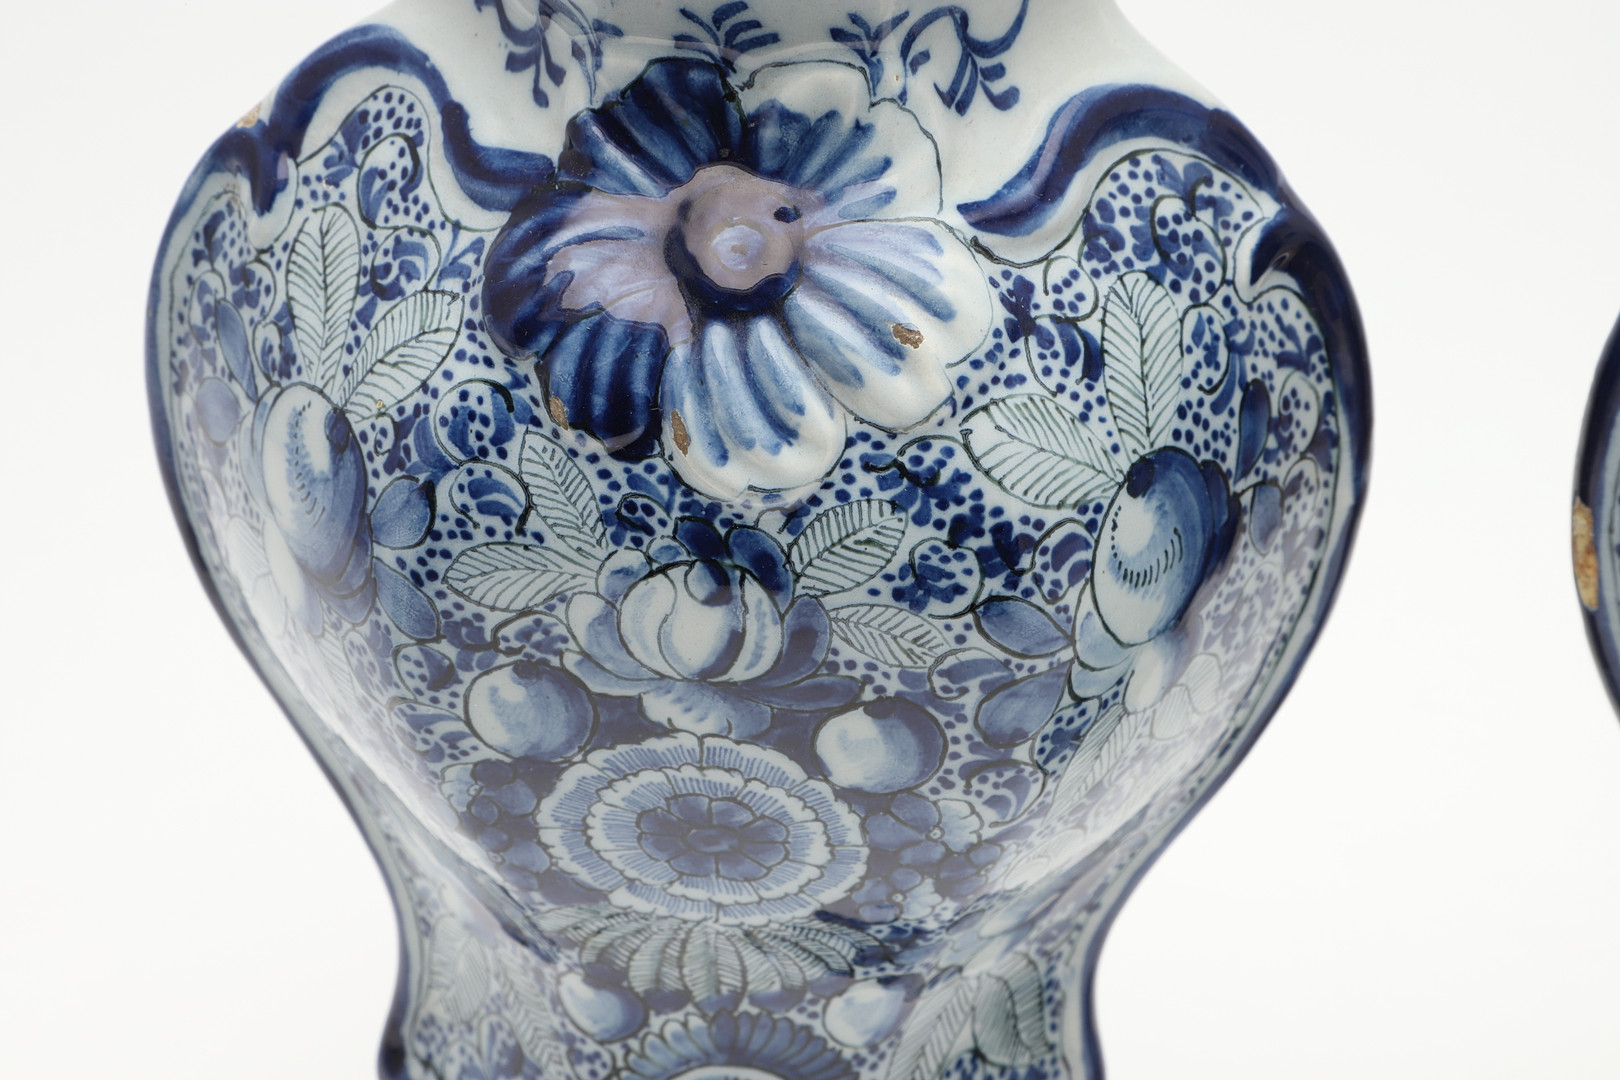 TWO PAIRS OF ANTIQUE DELFT VASES & ANOTHER VASE. - Image 39 of 60